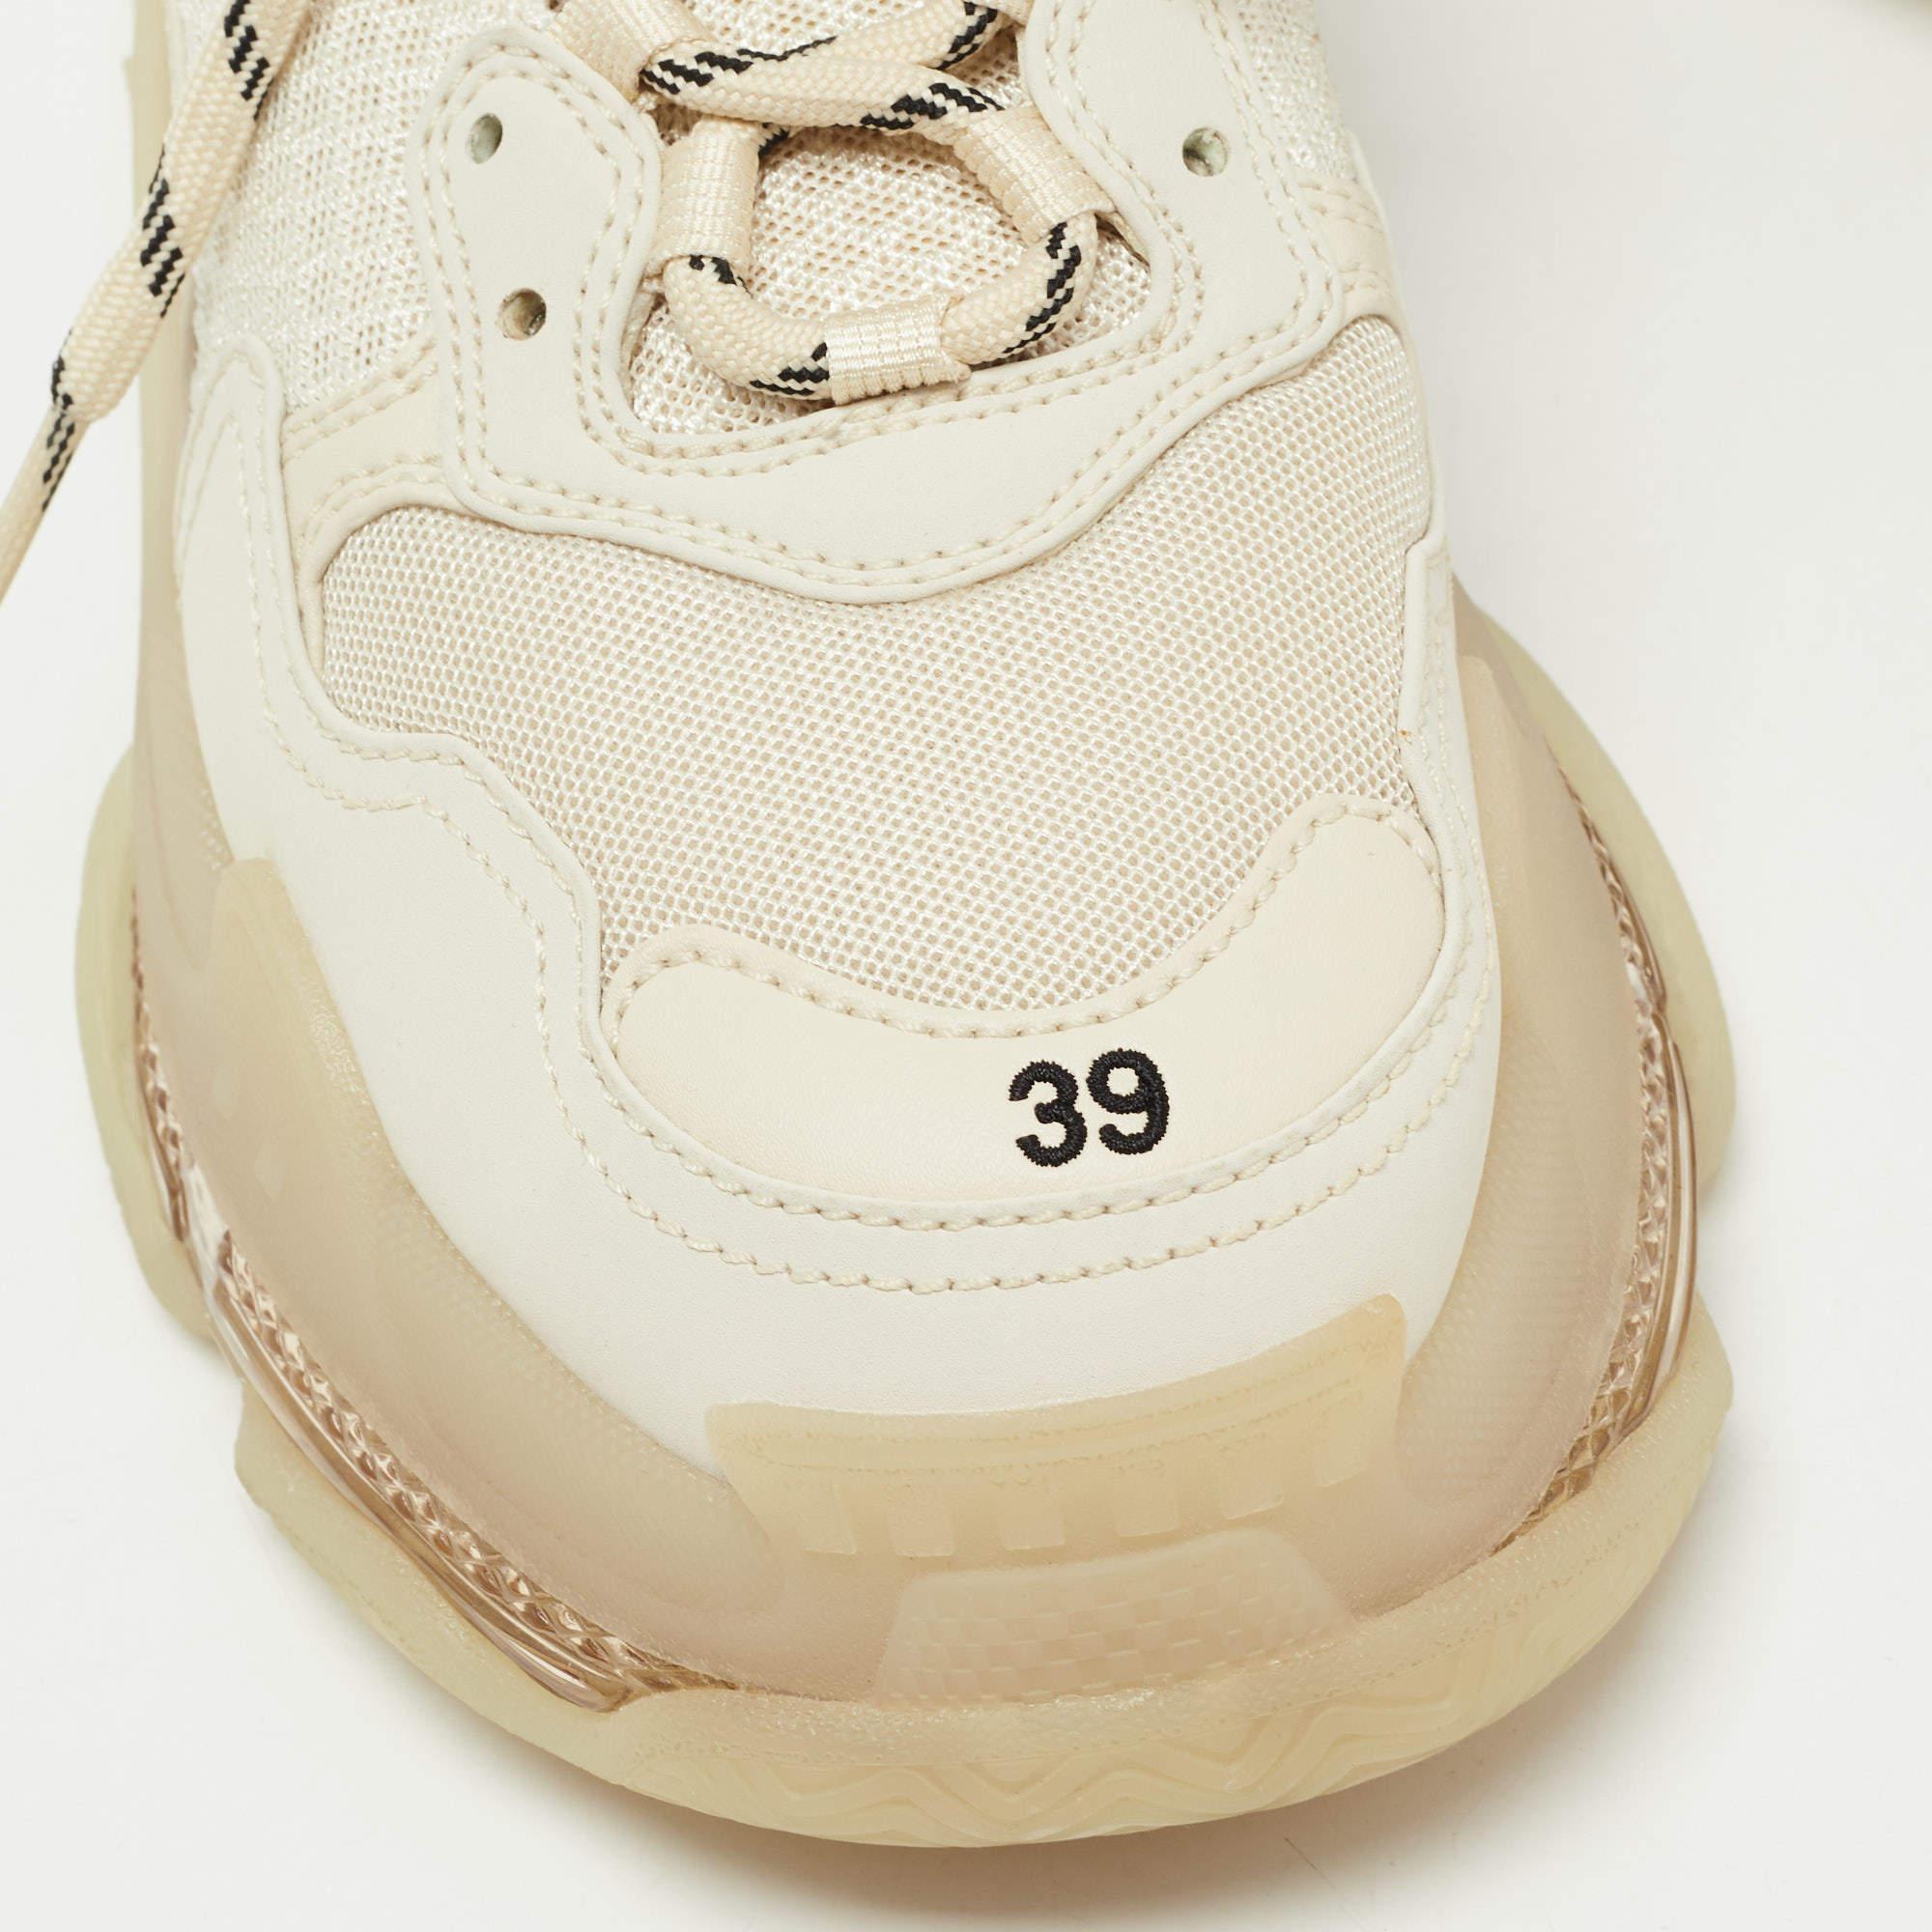 Balenciaga Cream Nubuck Leather and Mesh Triple S Clear Sneakers Size 39 1